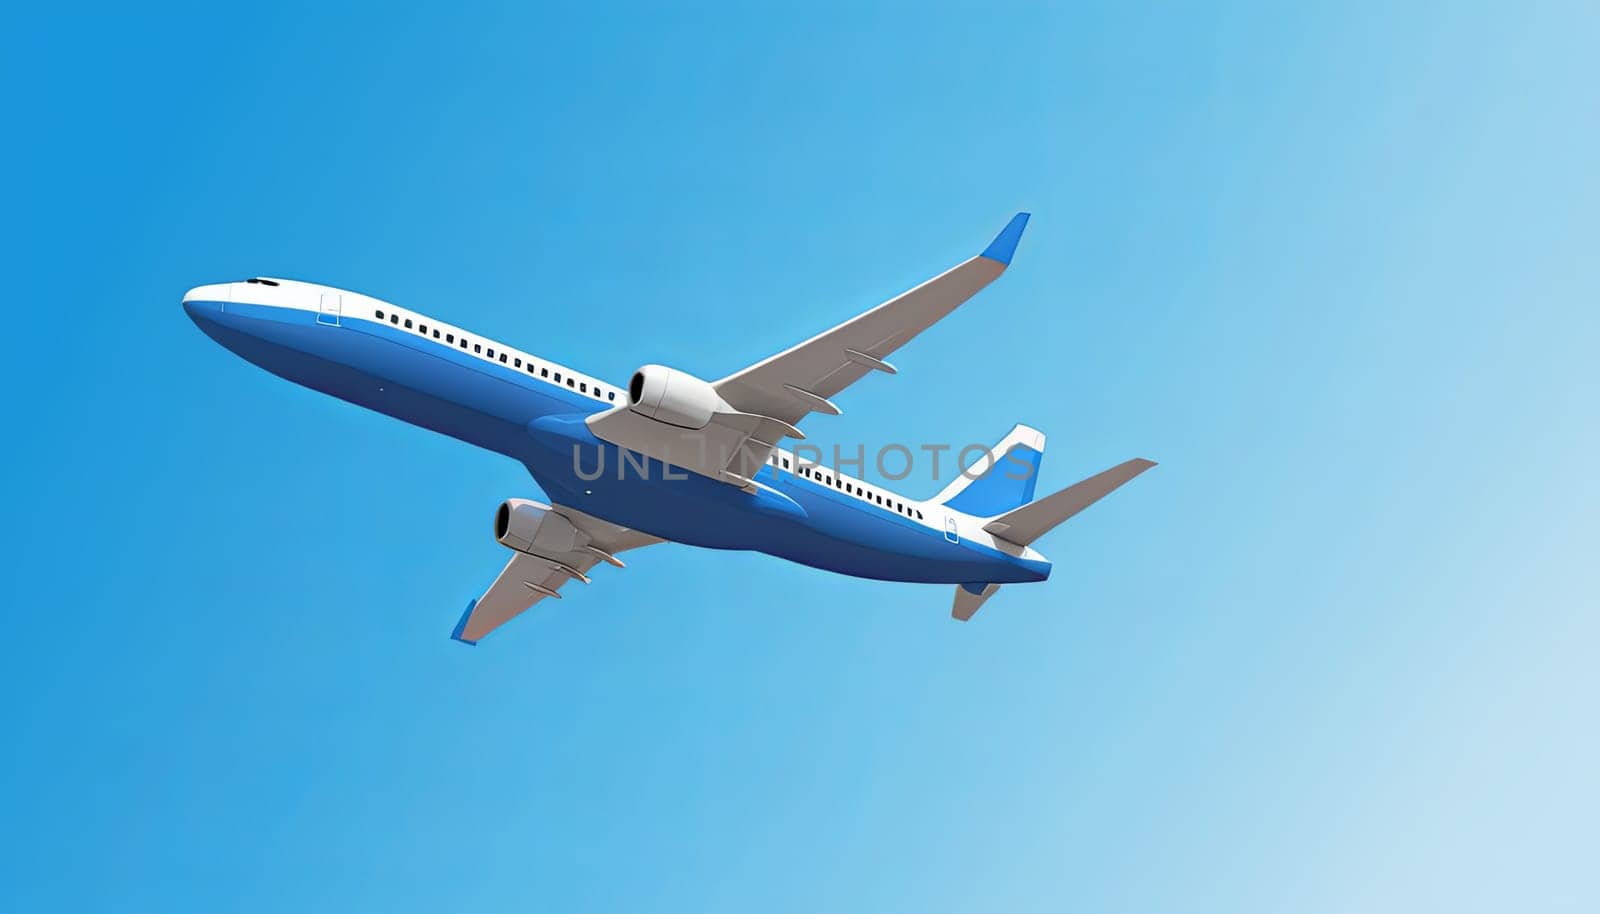 Illustration of a white commercial airplane on a blue background.